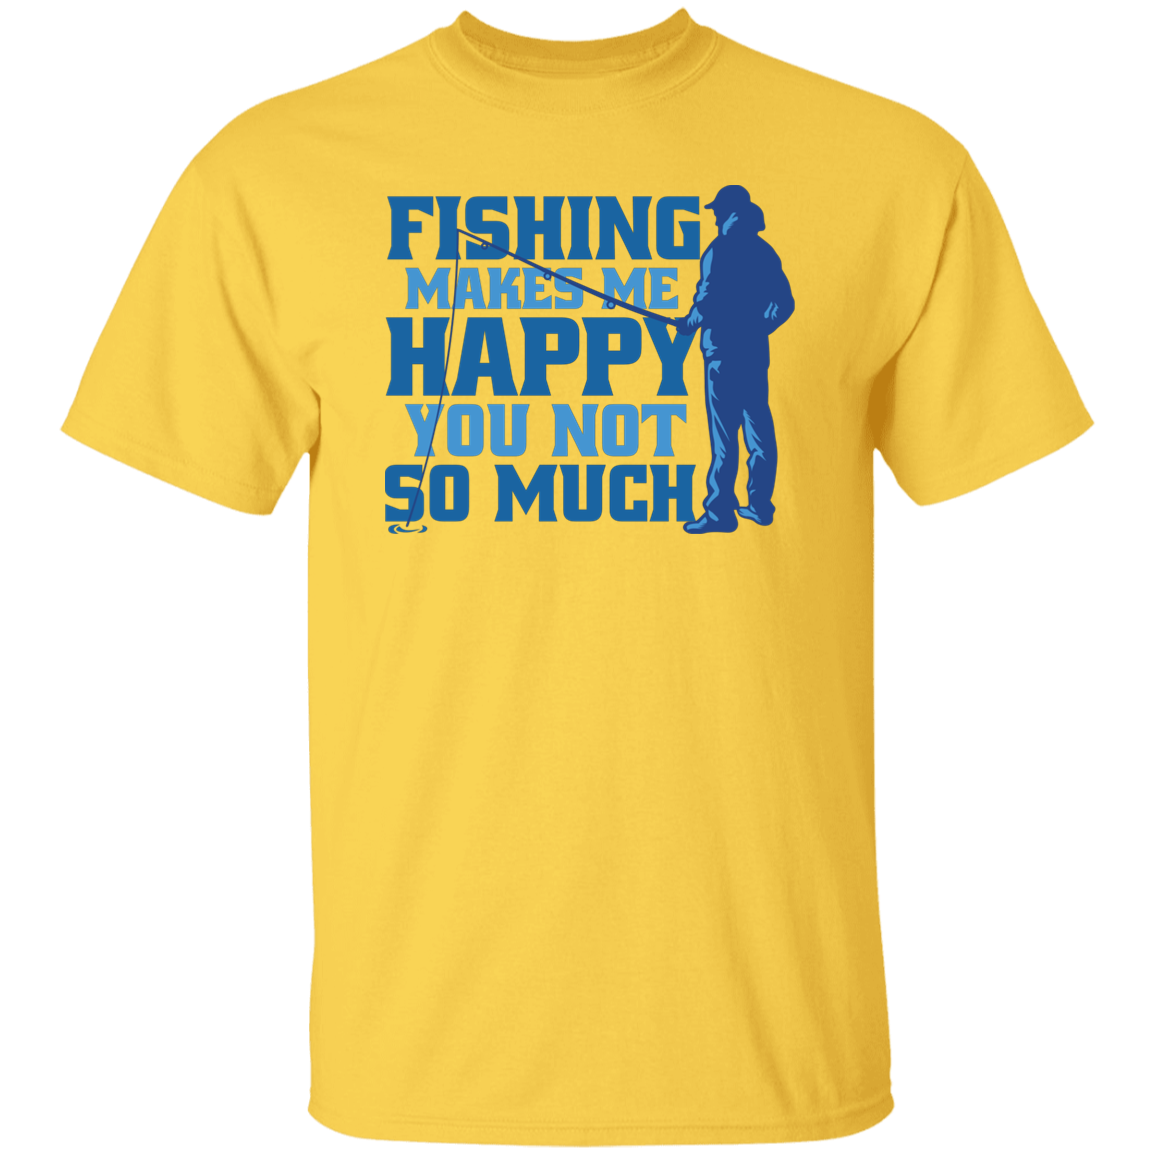 Fishing Makes Me Happy So You Not So Much T-Shirt